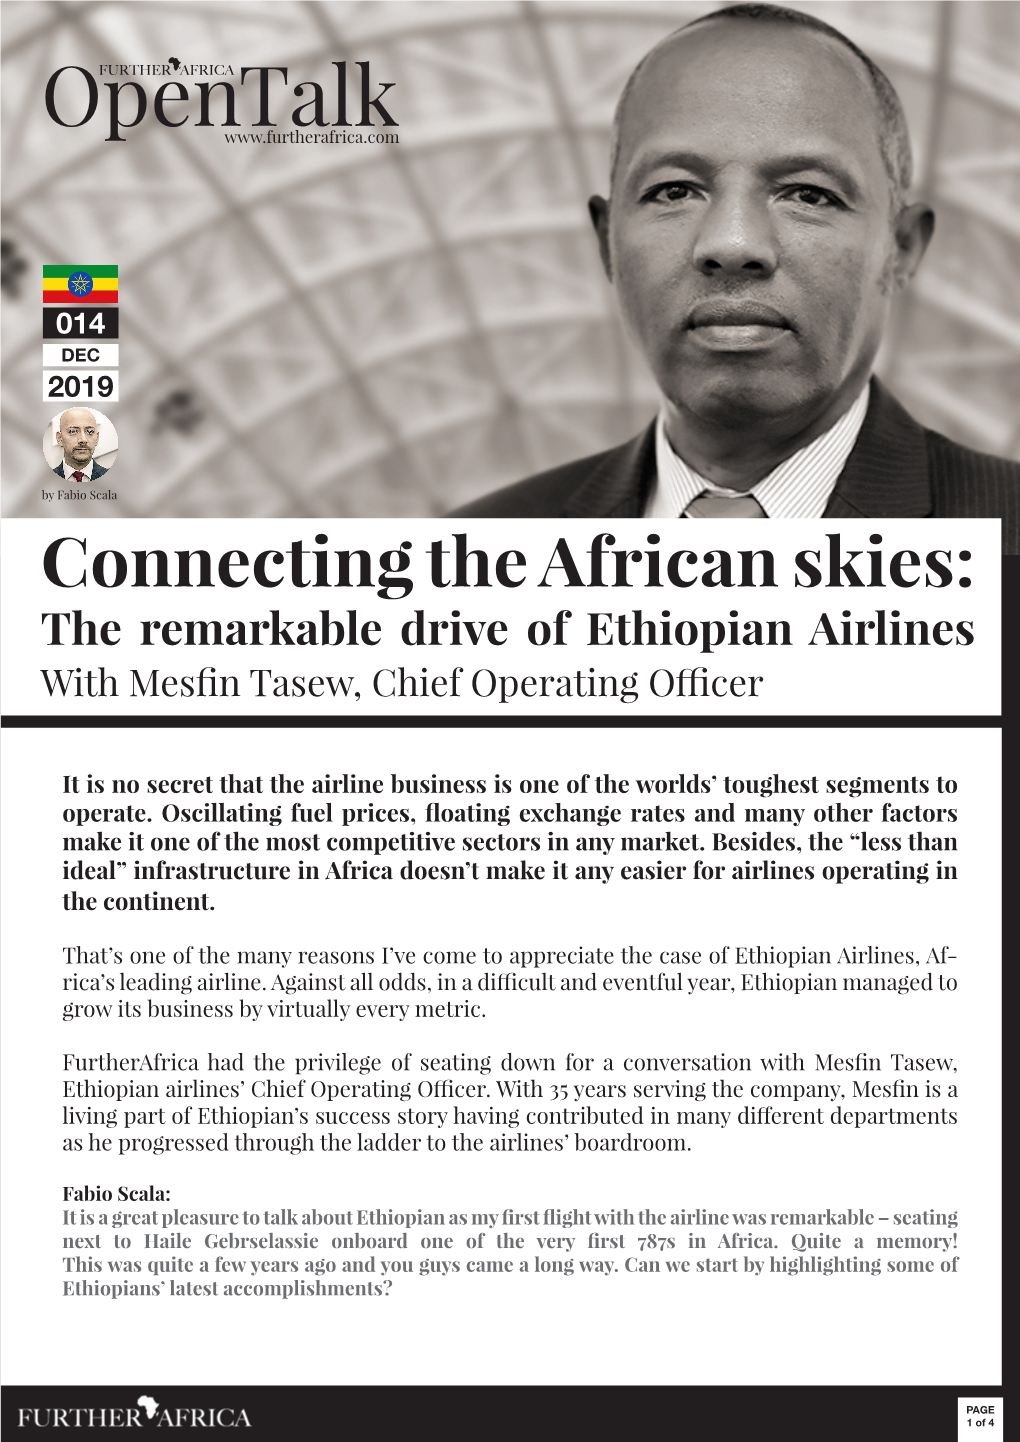 Connecting the African Skies: the Remarkable Drive of Ethiopian Airlines with Mesfin Tasew, Chief Operating Officer